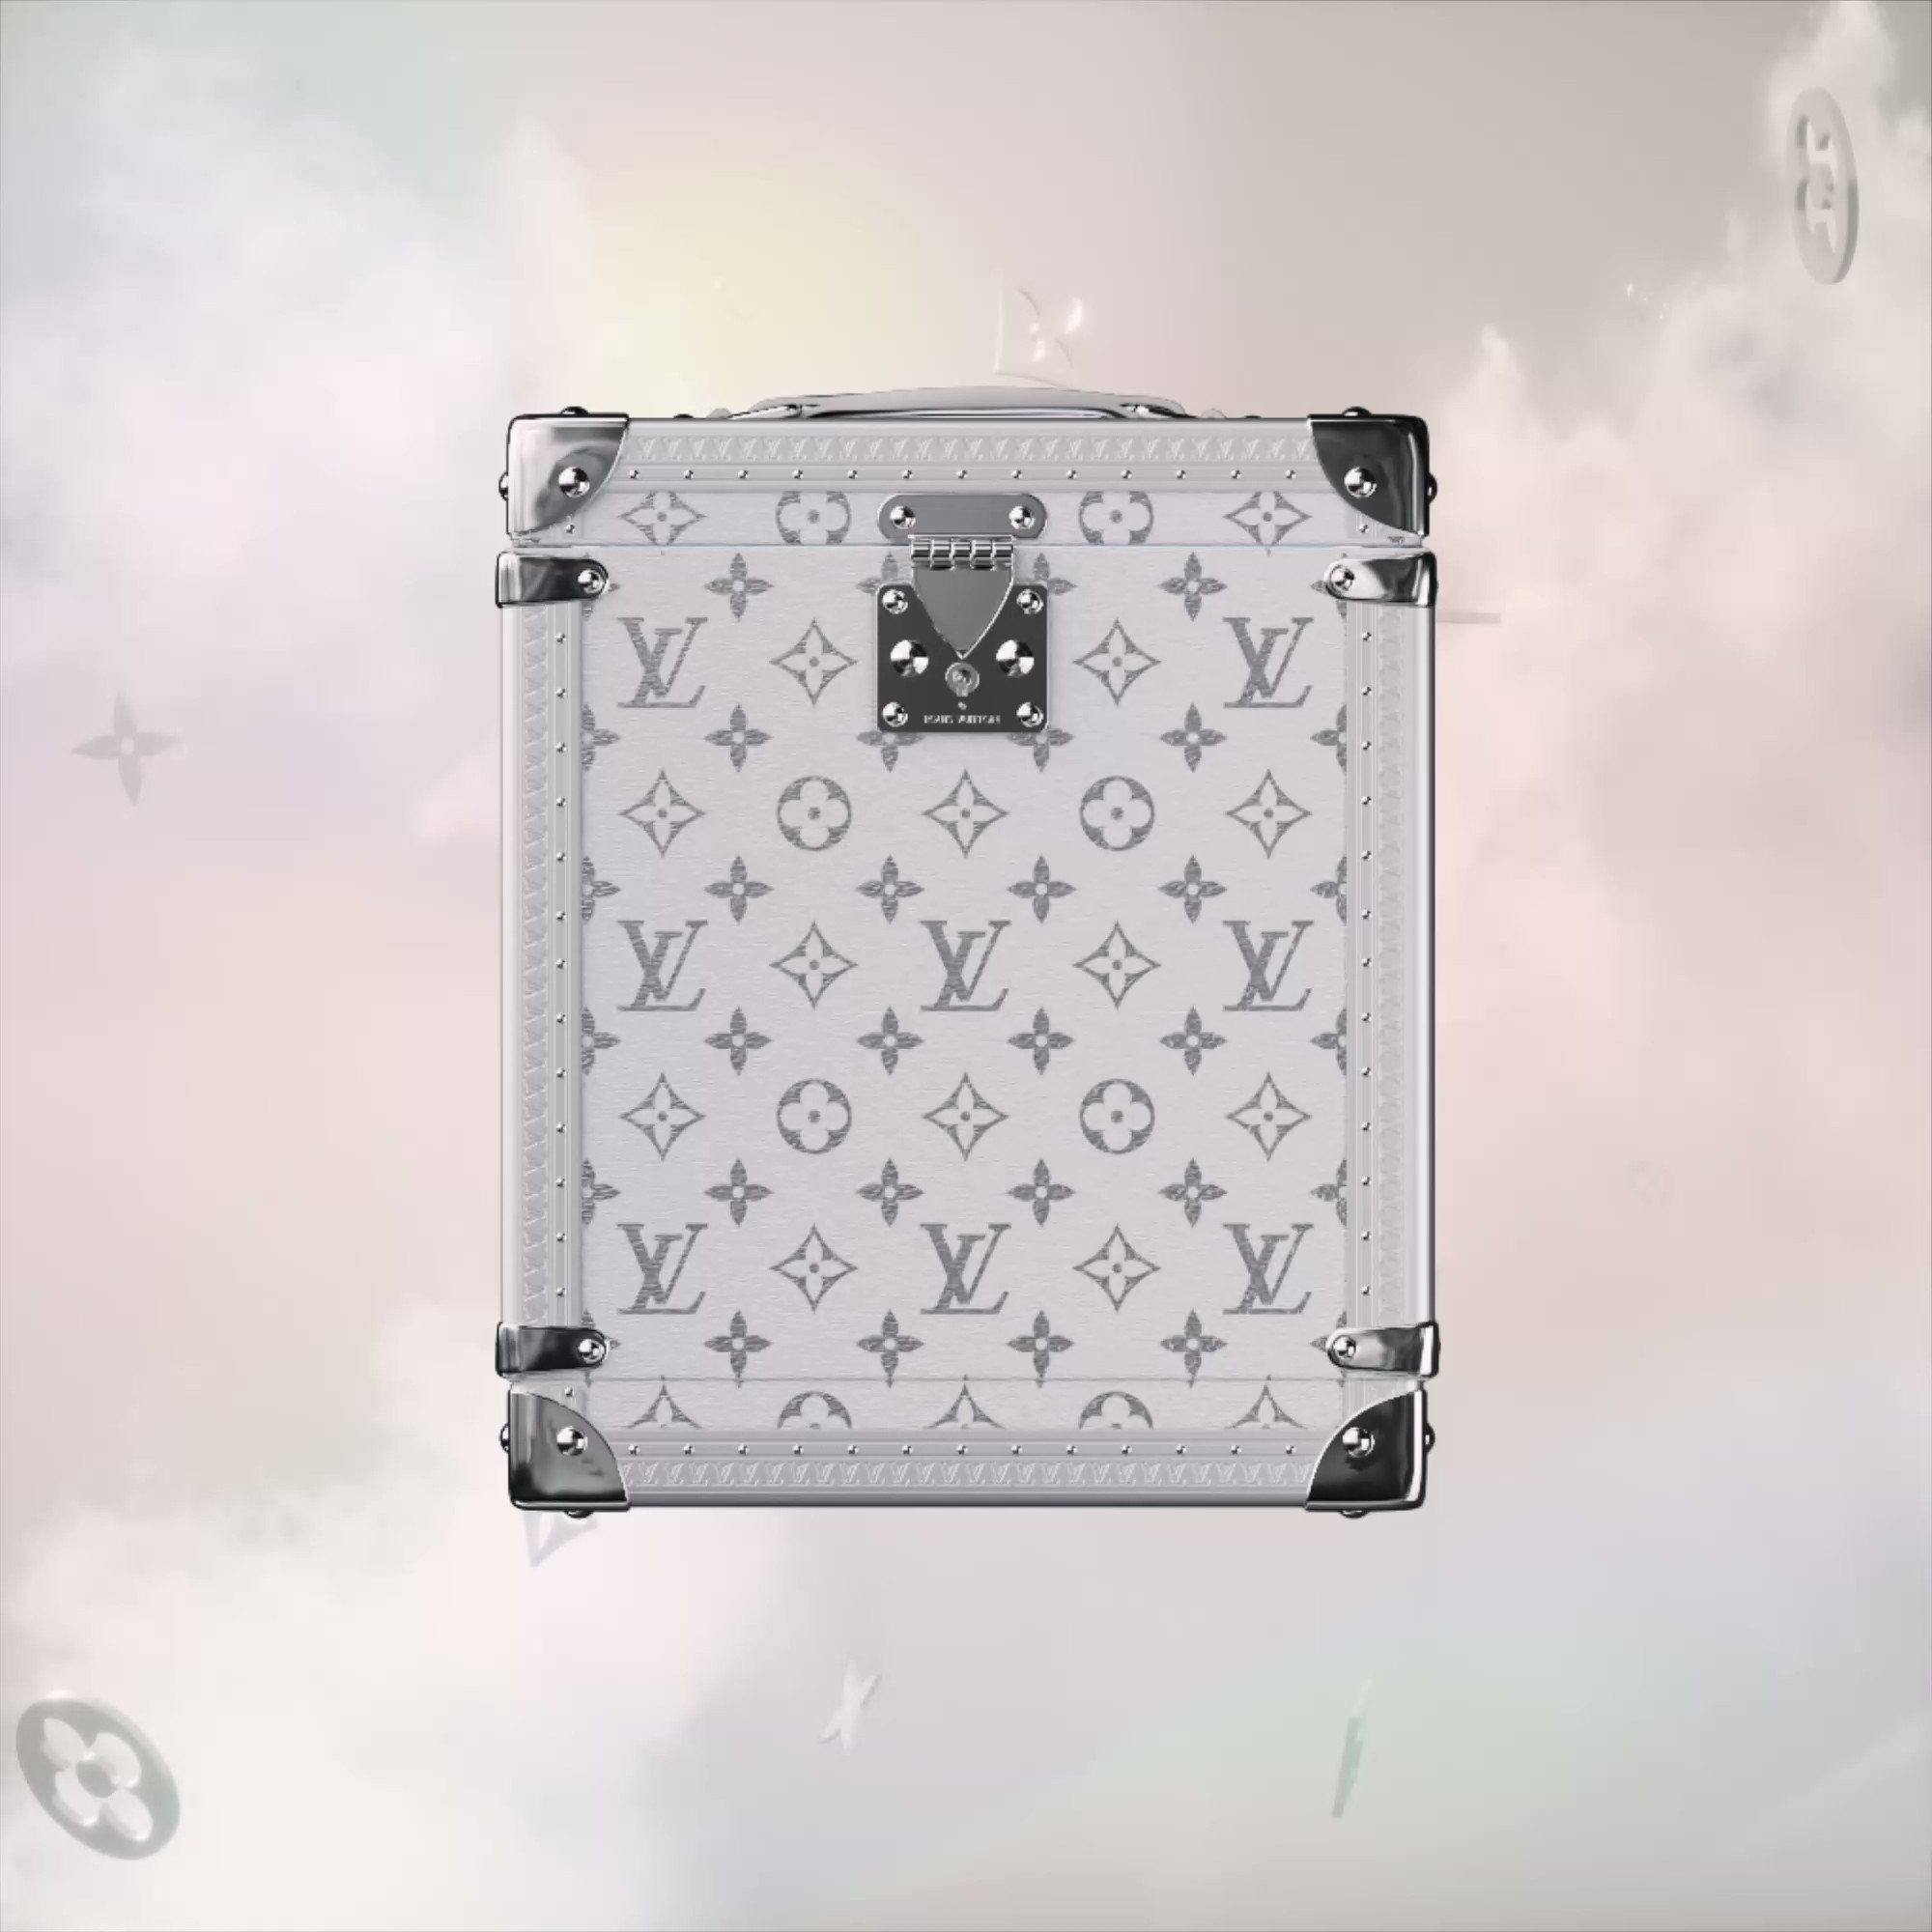 Louis Vuitton on X: VIA Treasure Trunk. The allowlist is now closed. # LouisVuitton invites selected voyagers to take part in the sale of the VIA  Treasure Trunks on Friday, June 16th, with